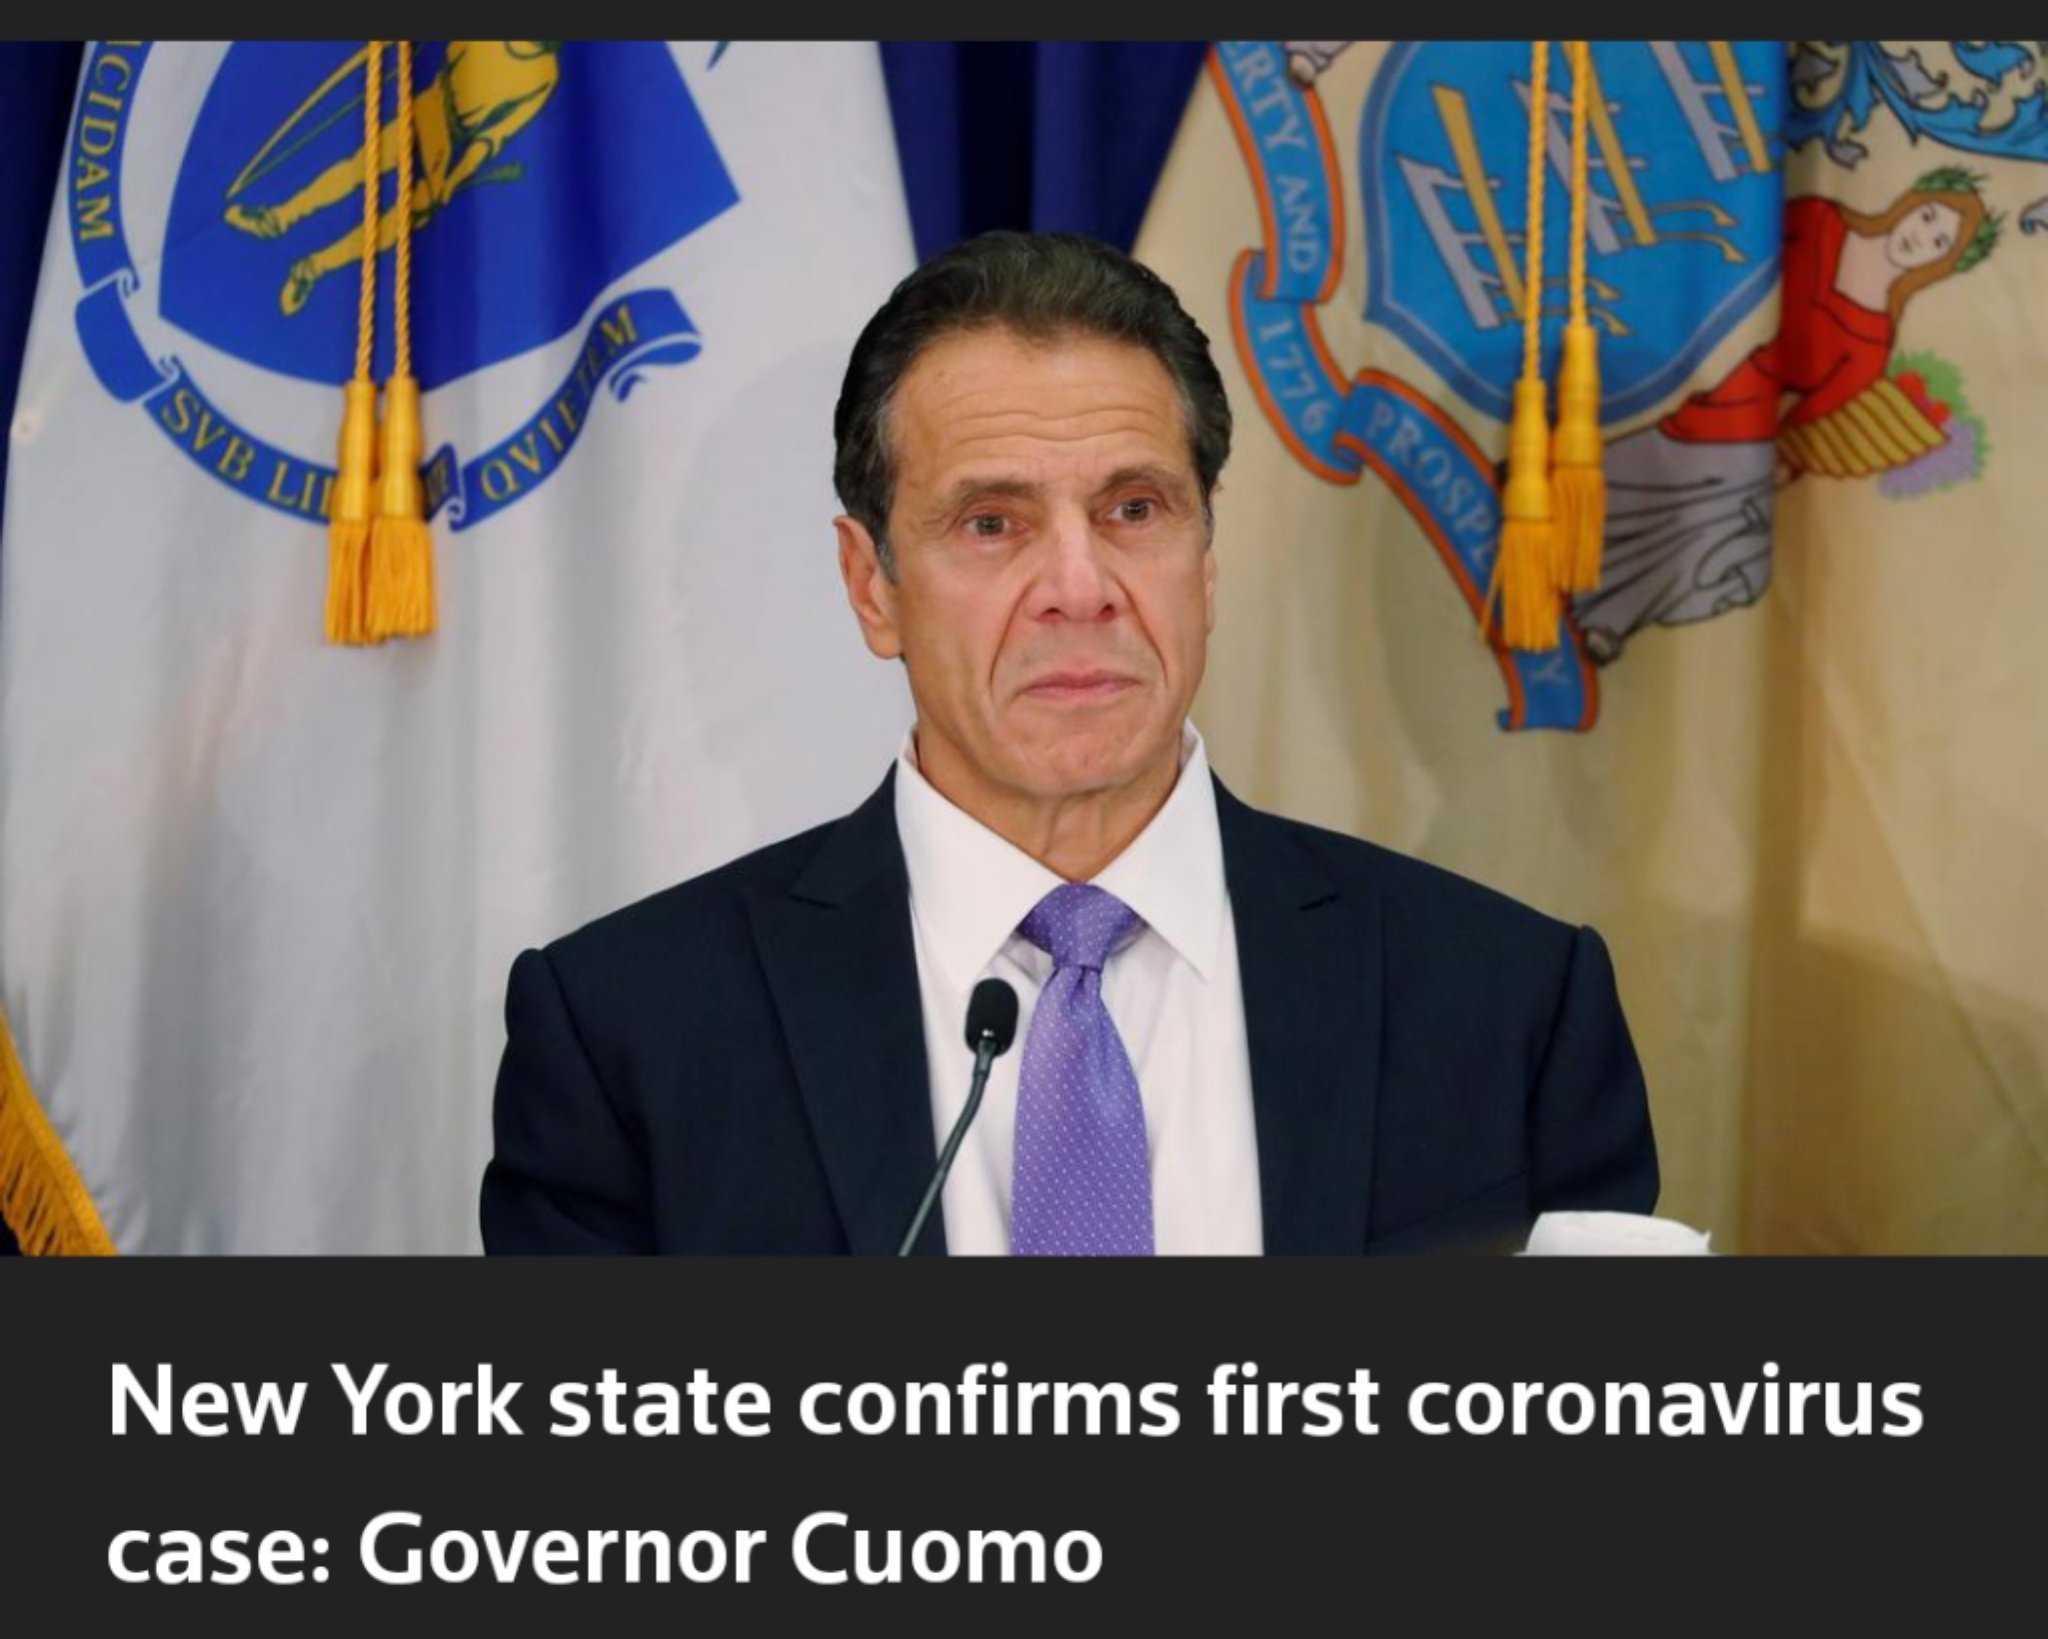 Picture of Andrew Cuomo with the headline "New York state confirms first coronavirus case: Governor Cuomo"